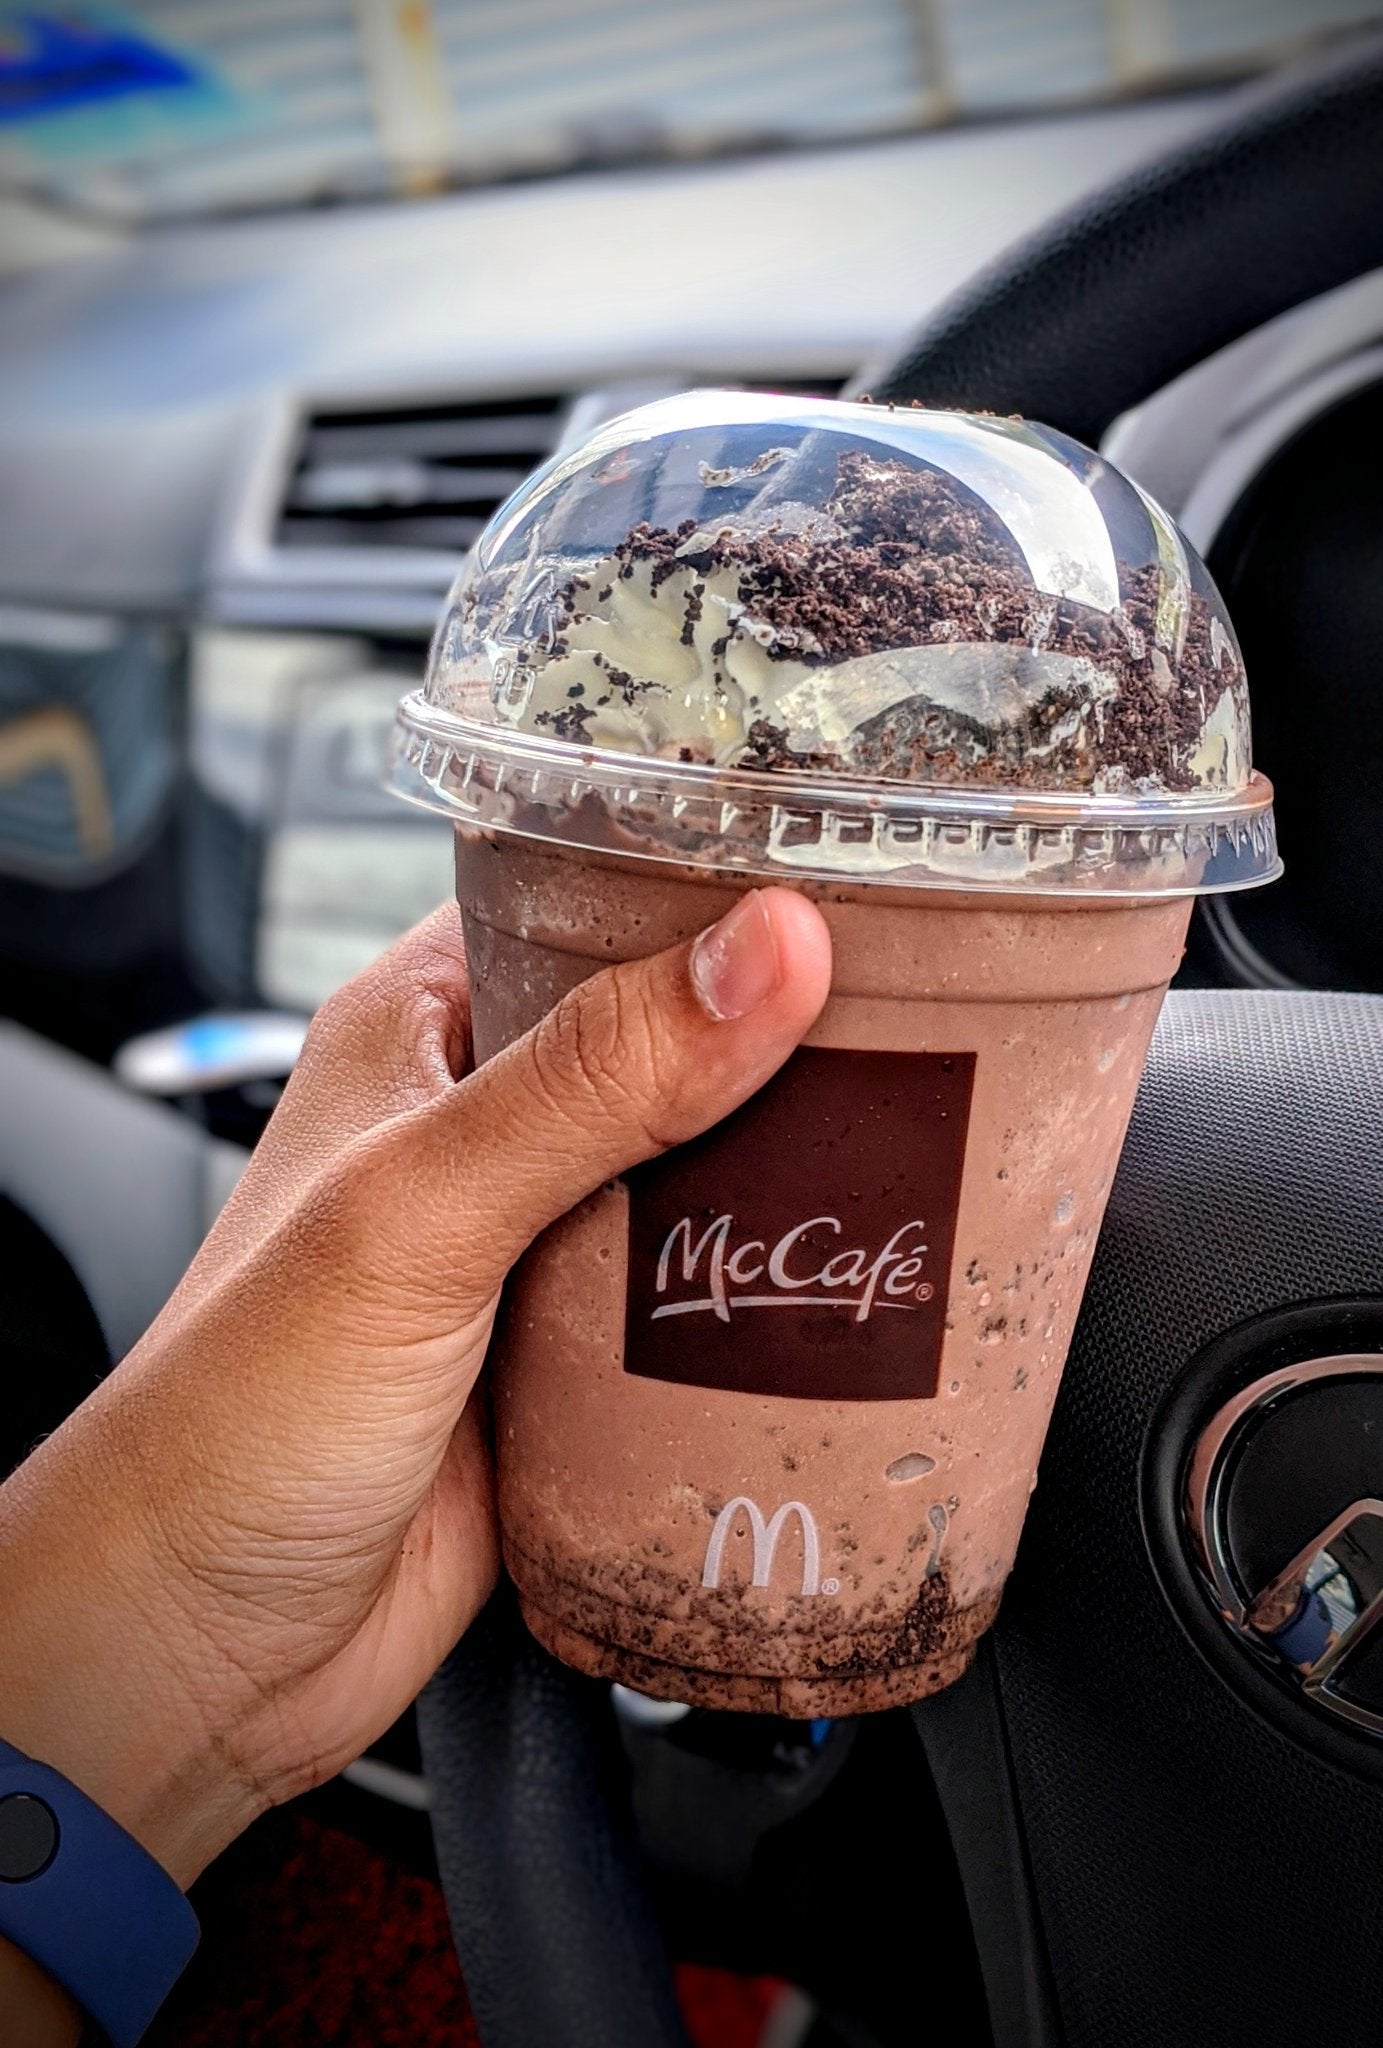 McDonald's M'sia Has Limited Edition Chocolate Drink With Oreo Crumbs & It Looks Super Yummy! - WORLD OF BUZZ 3